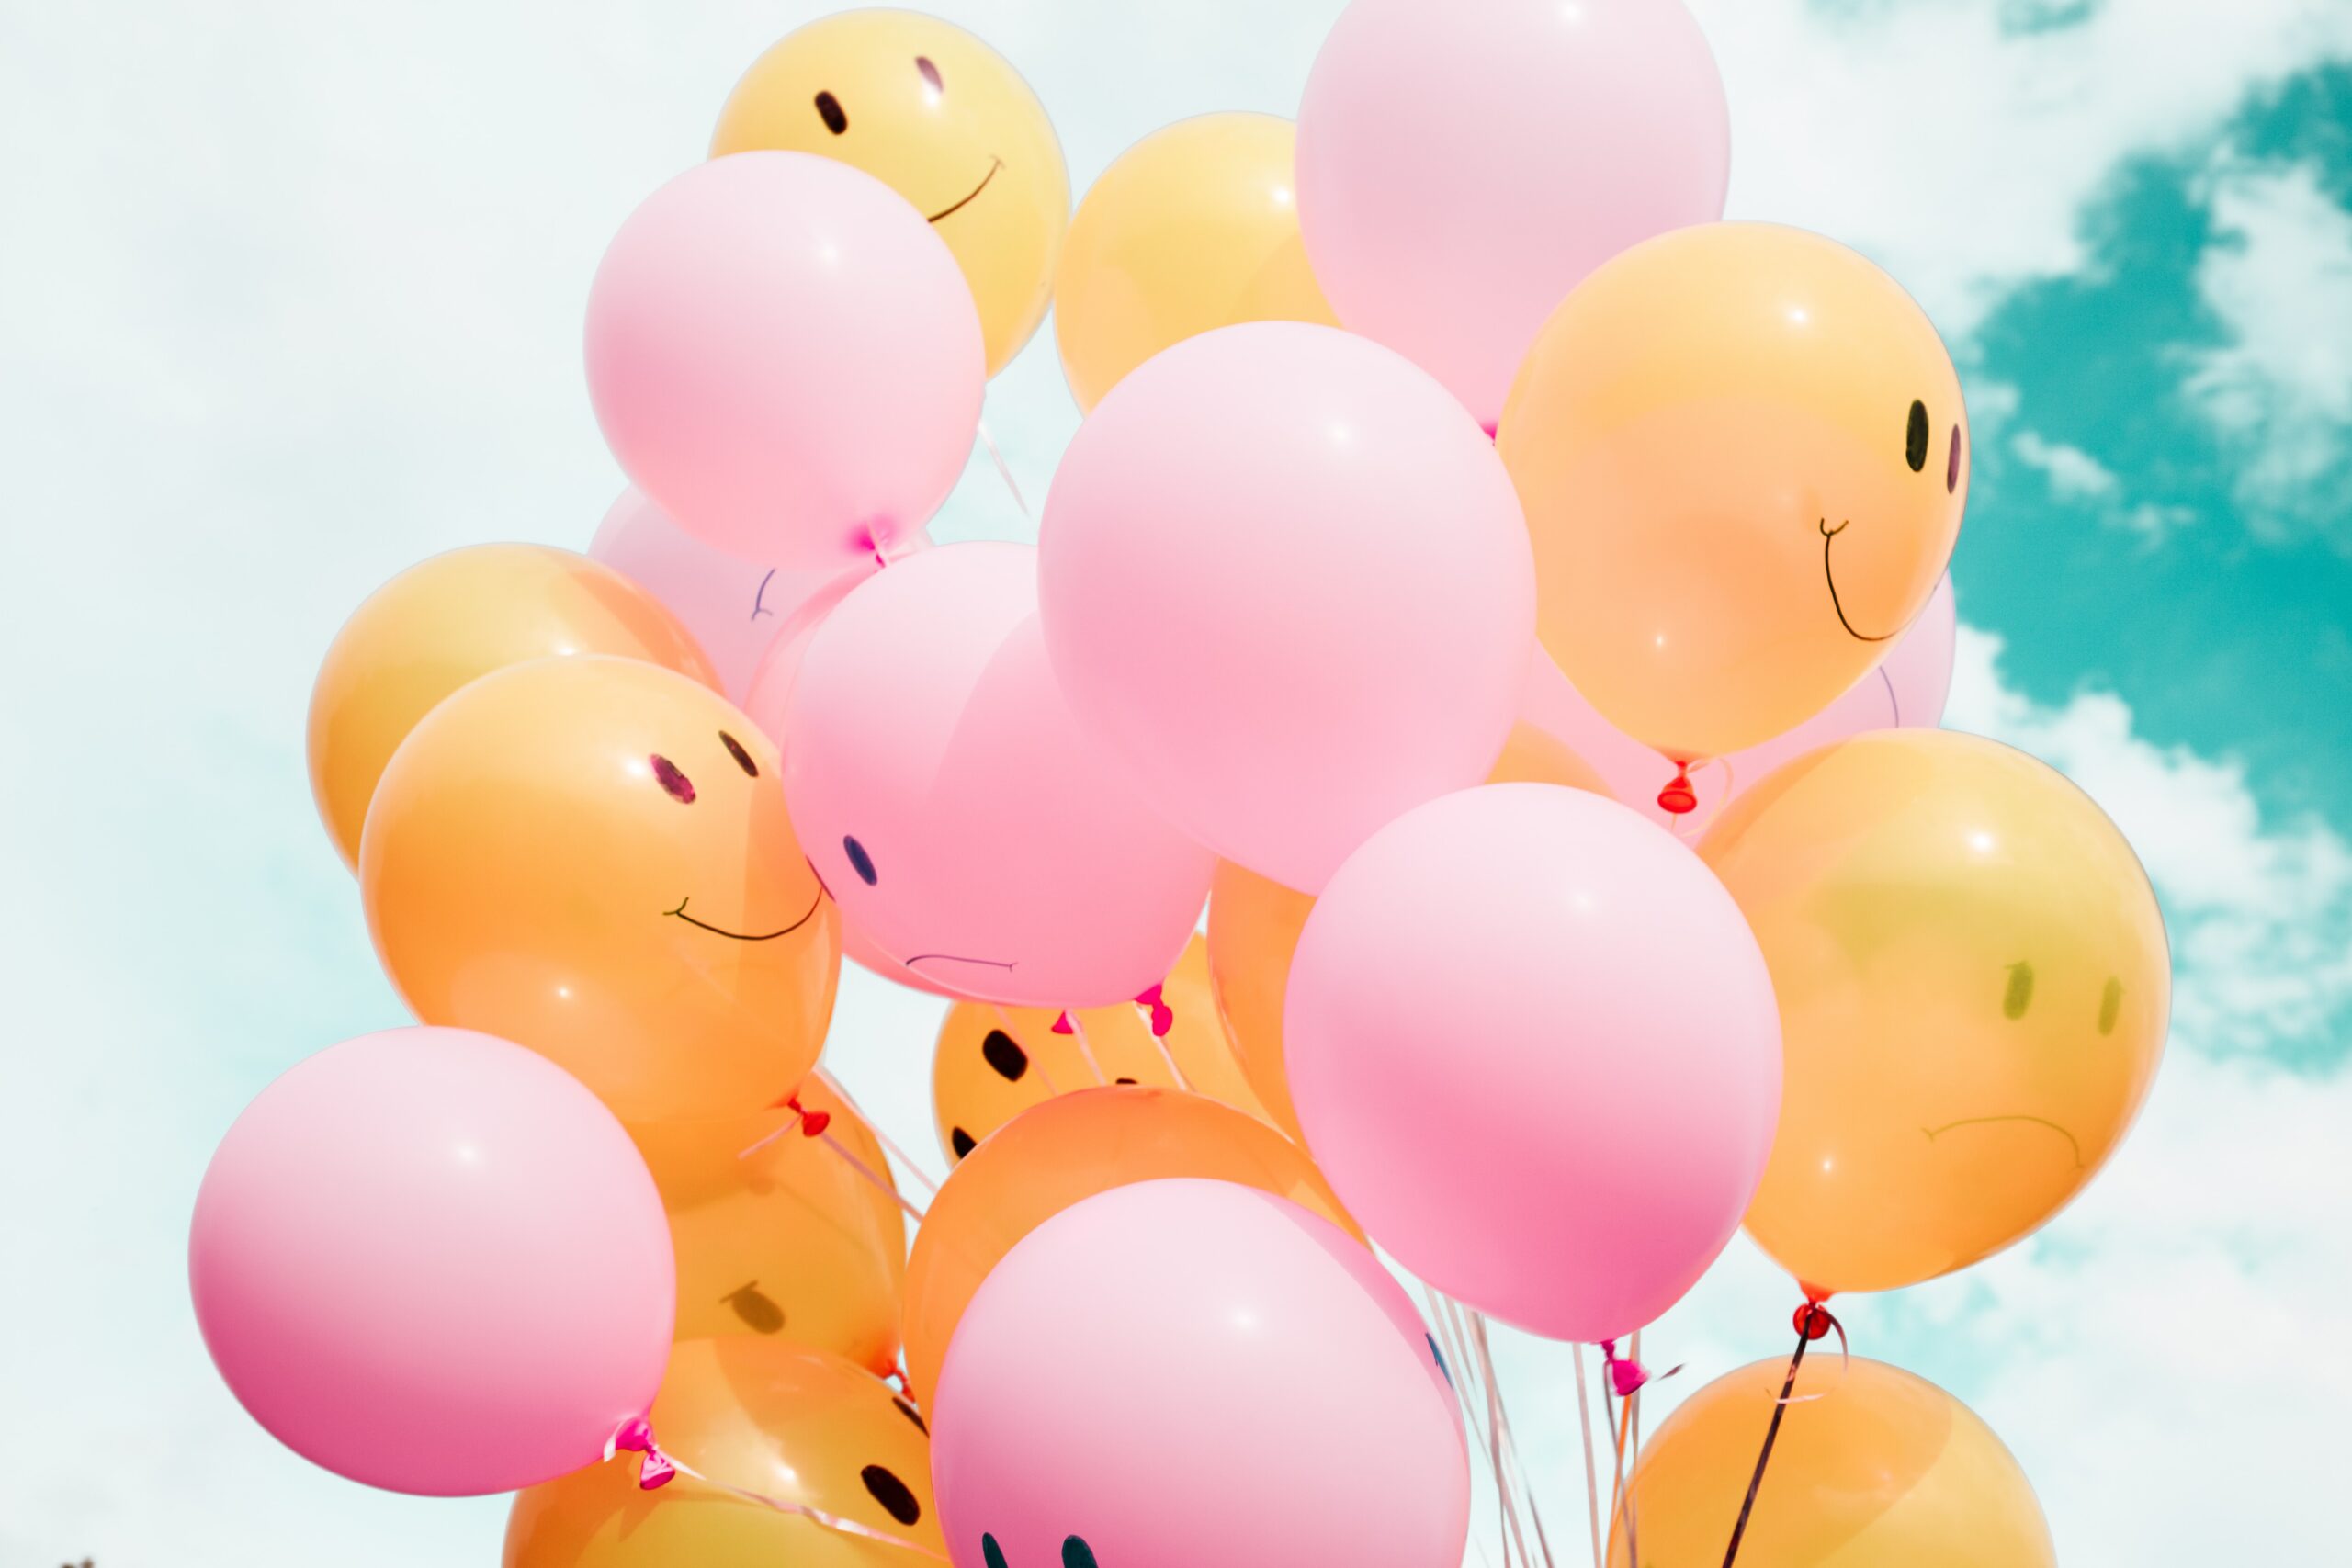 balloons with happy and sad faces